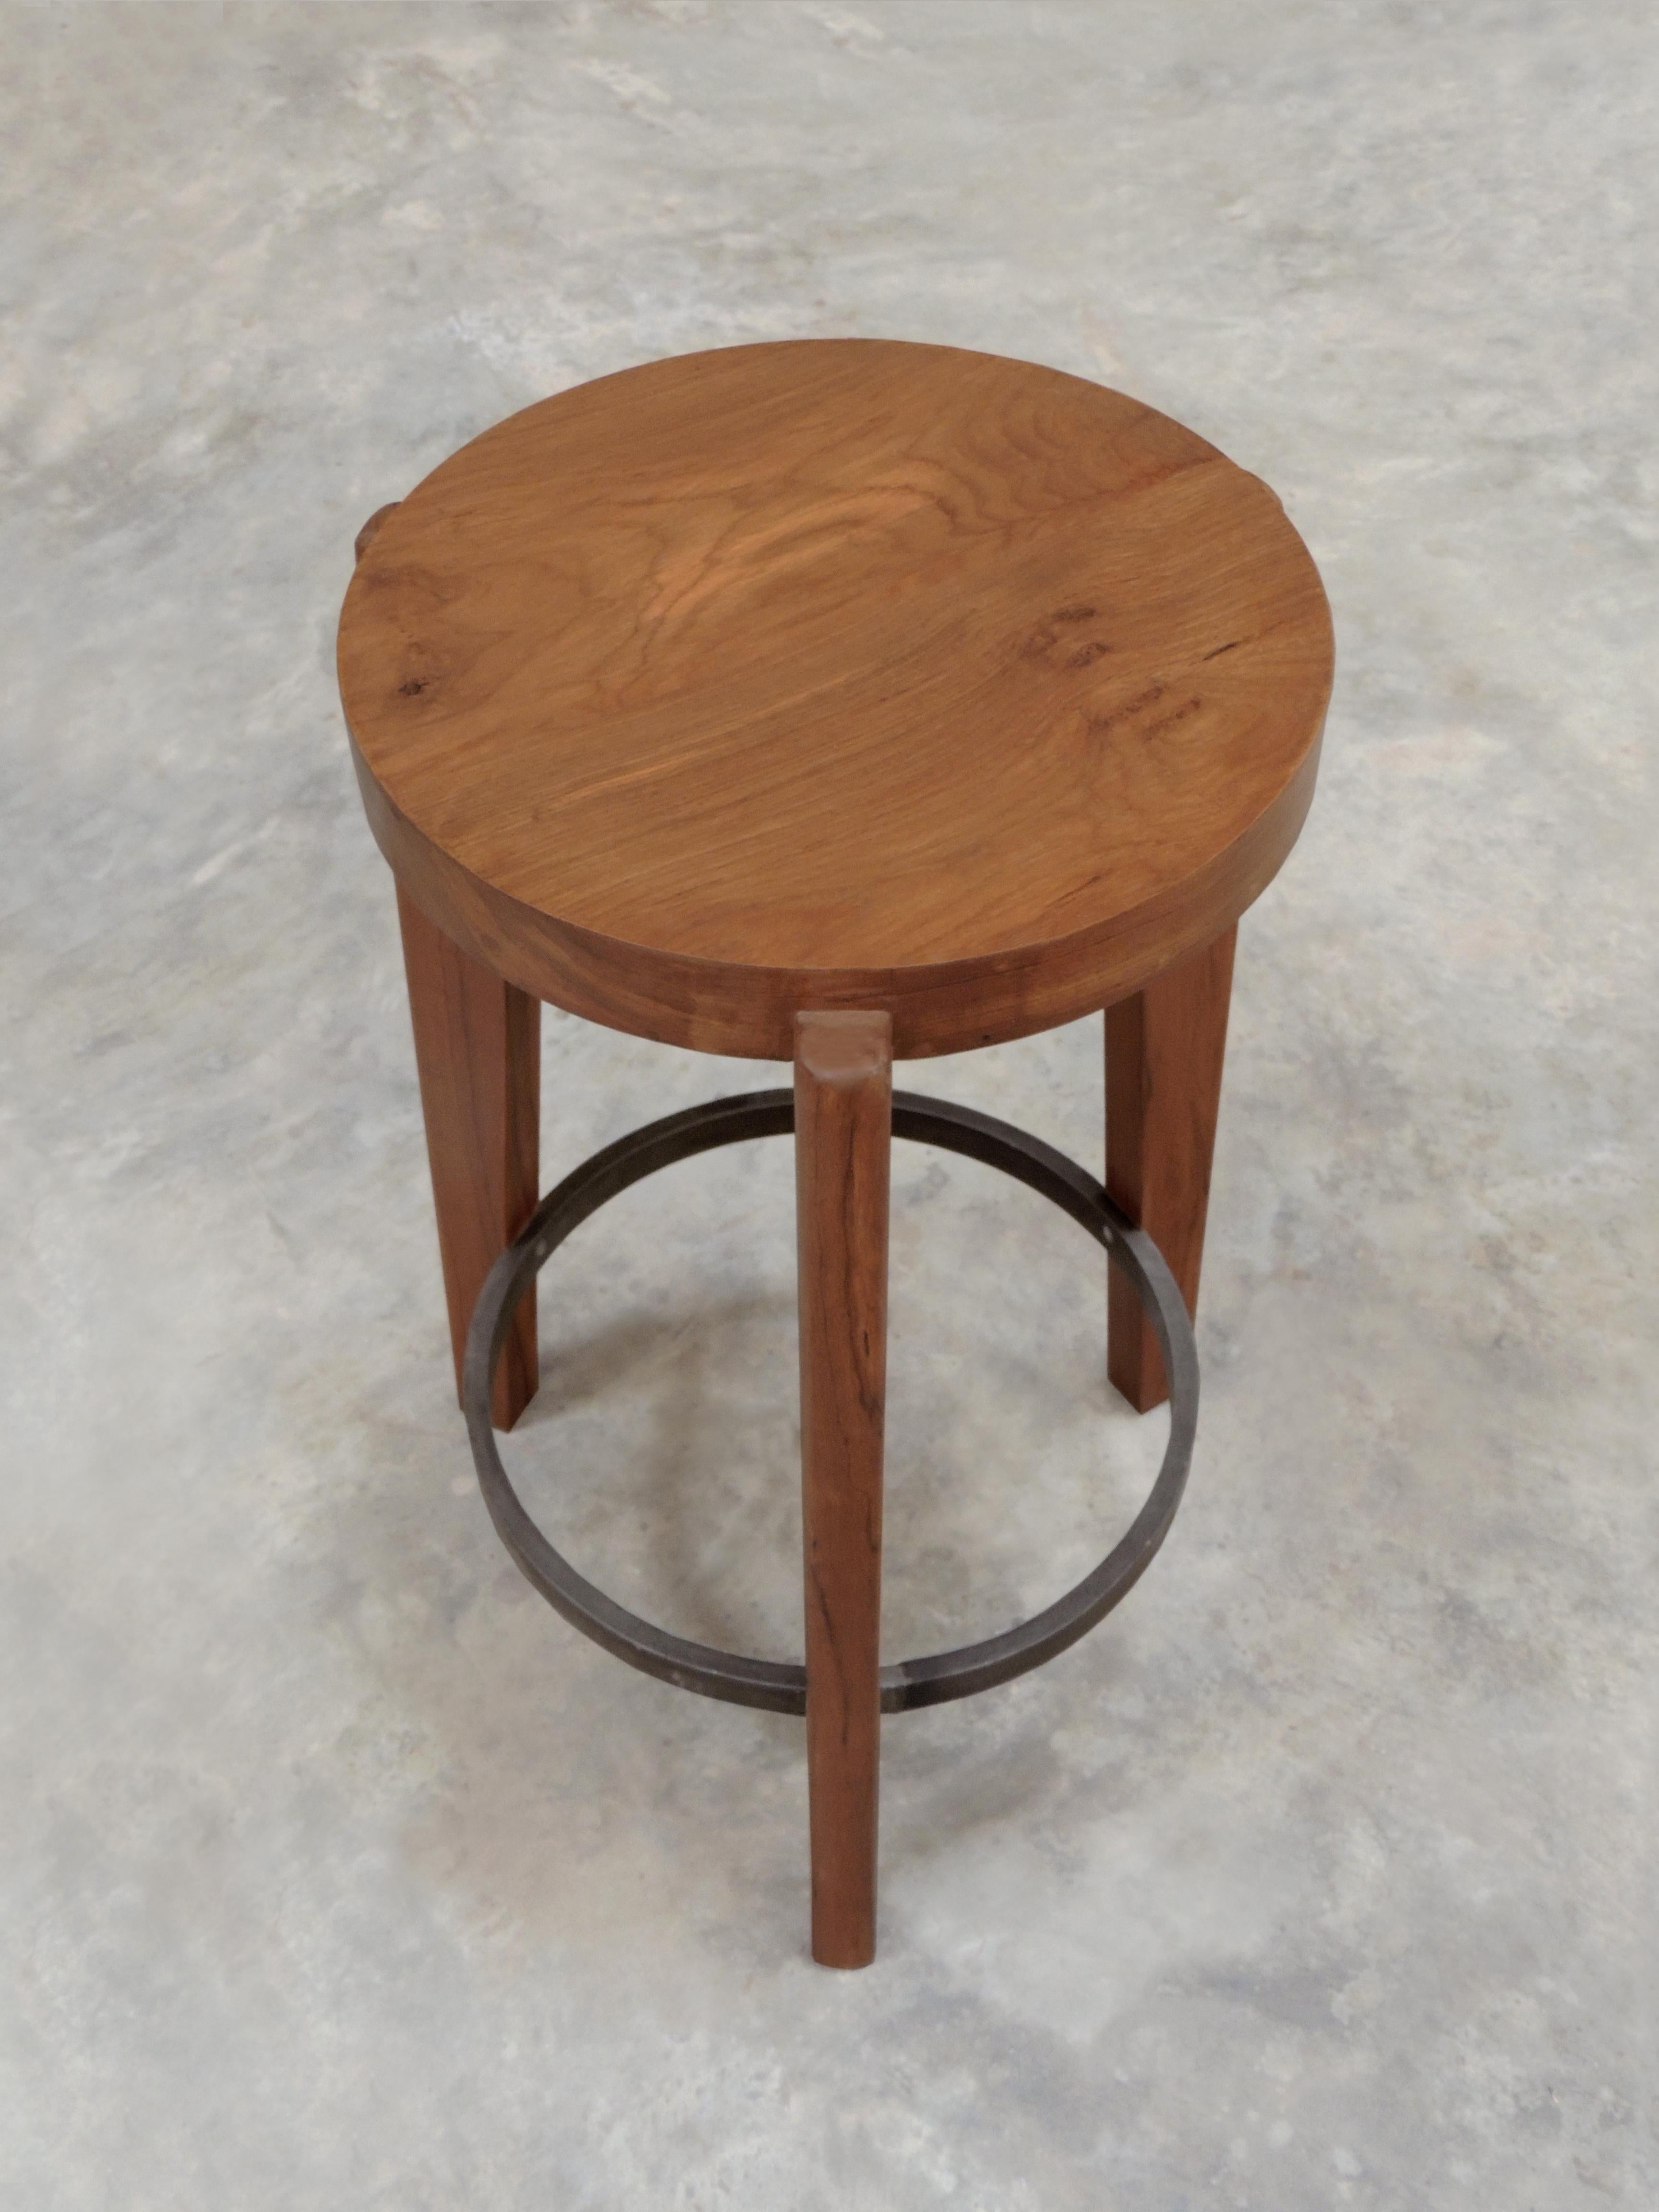 Pierre Jeanneret's side table/stool - hand-sculpted contemporary reedition

The counter stool or round stool has a solid teak seat with two metal rings - one at the foot of the stool and a smaller ring supporting the seat. The seat is gently